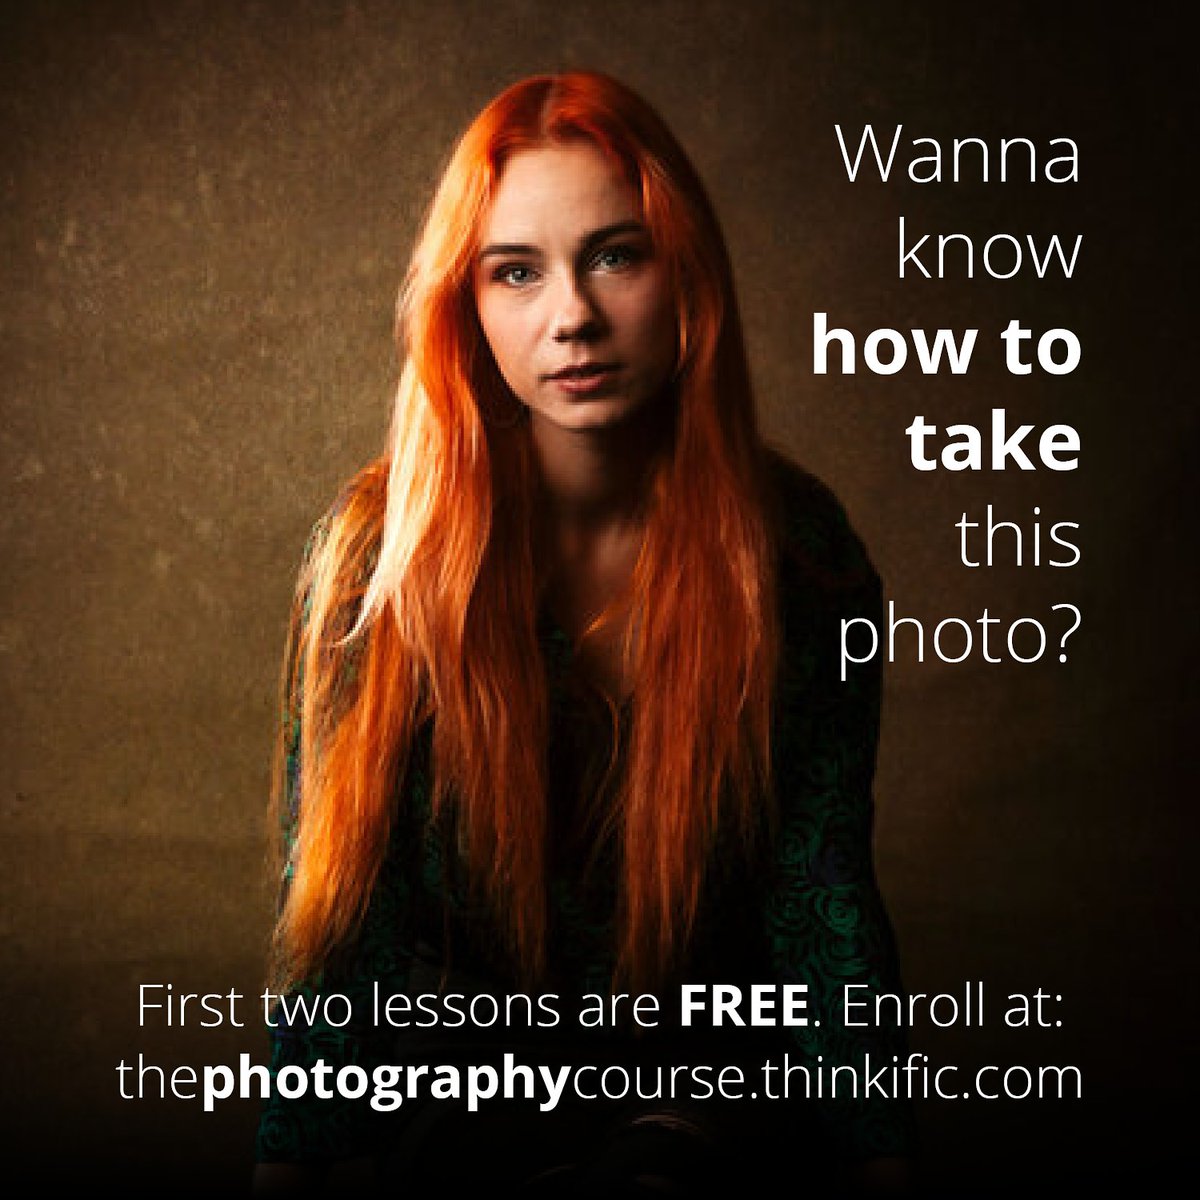 Dude, it's simple. And I'm gonna tell you using words your teacher was too afraid to use, like 'if' and 'yours' and 'f***'. Let's get down to some awesome learning with Luke.

thephotographycourse.thinkific.com

#learnphotography #photographyteacher #photographycourse #photoeducation